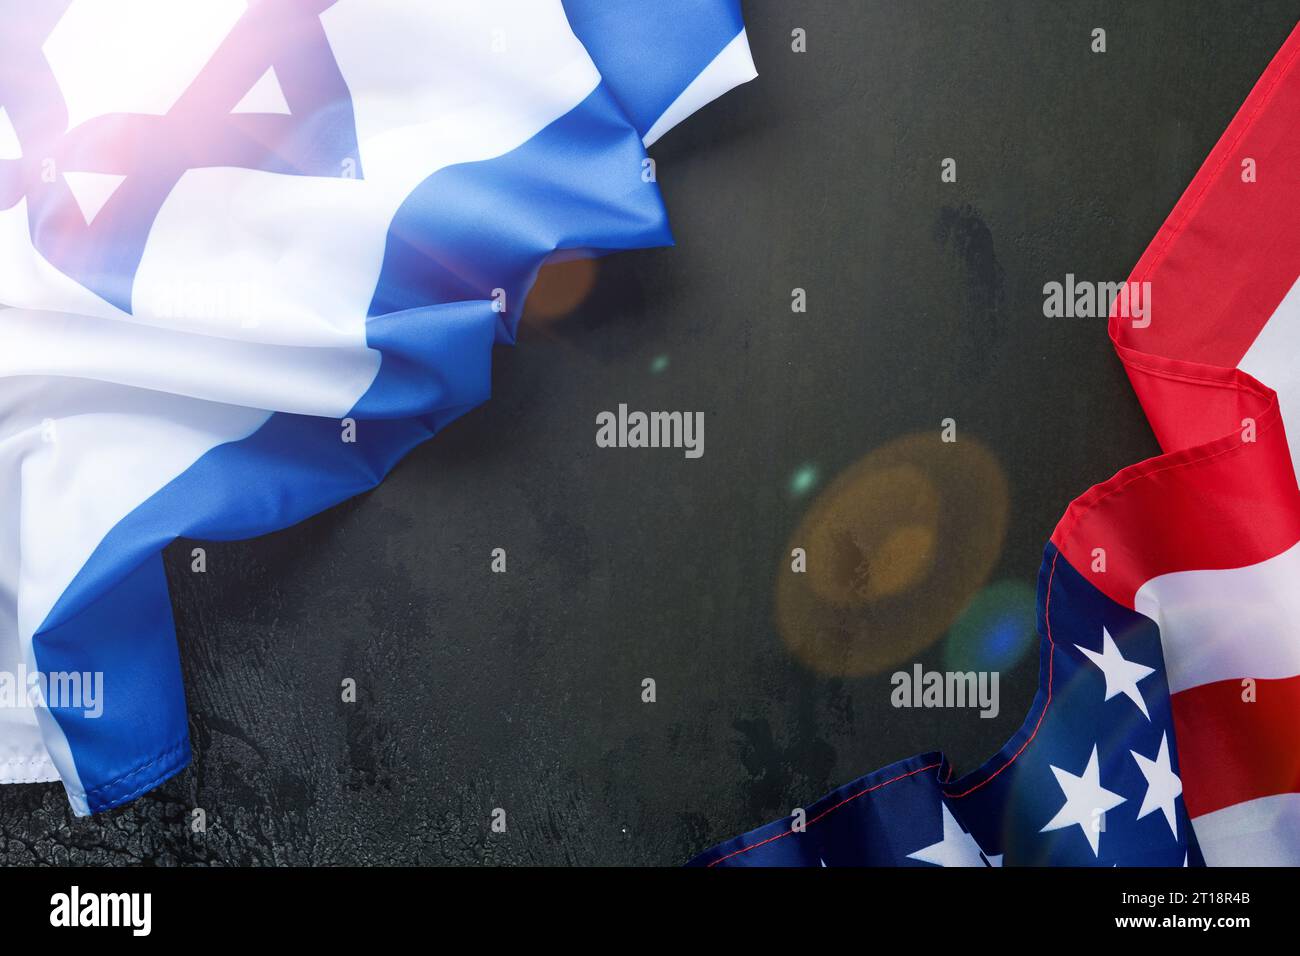 USA Israel flags. Two American and Israeli flags lie on black old concrete texture background opposite each other conveys partnership between two stat Stock Photo